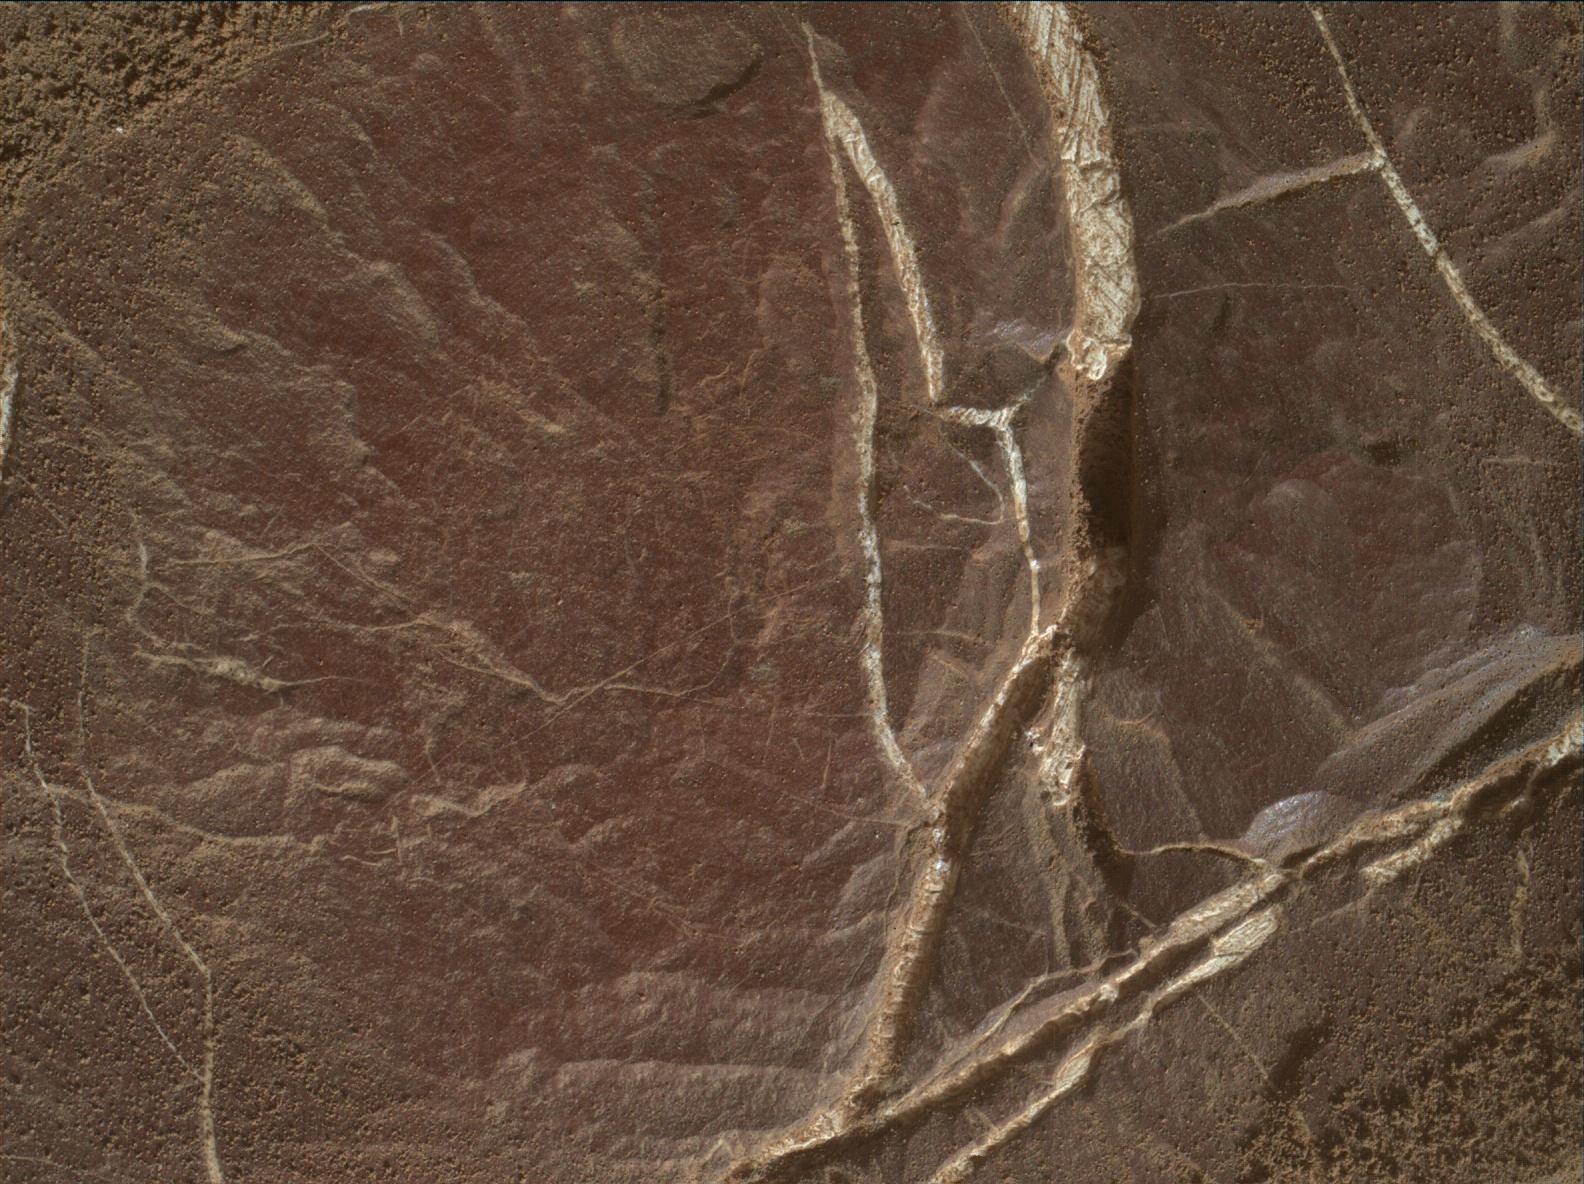 Nasa's Mars rover Curiosity acquired this image using its Mars Hand Lens Imager (MAHLI) on Sol 2044